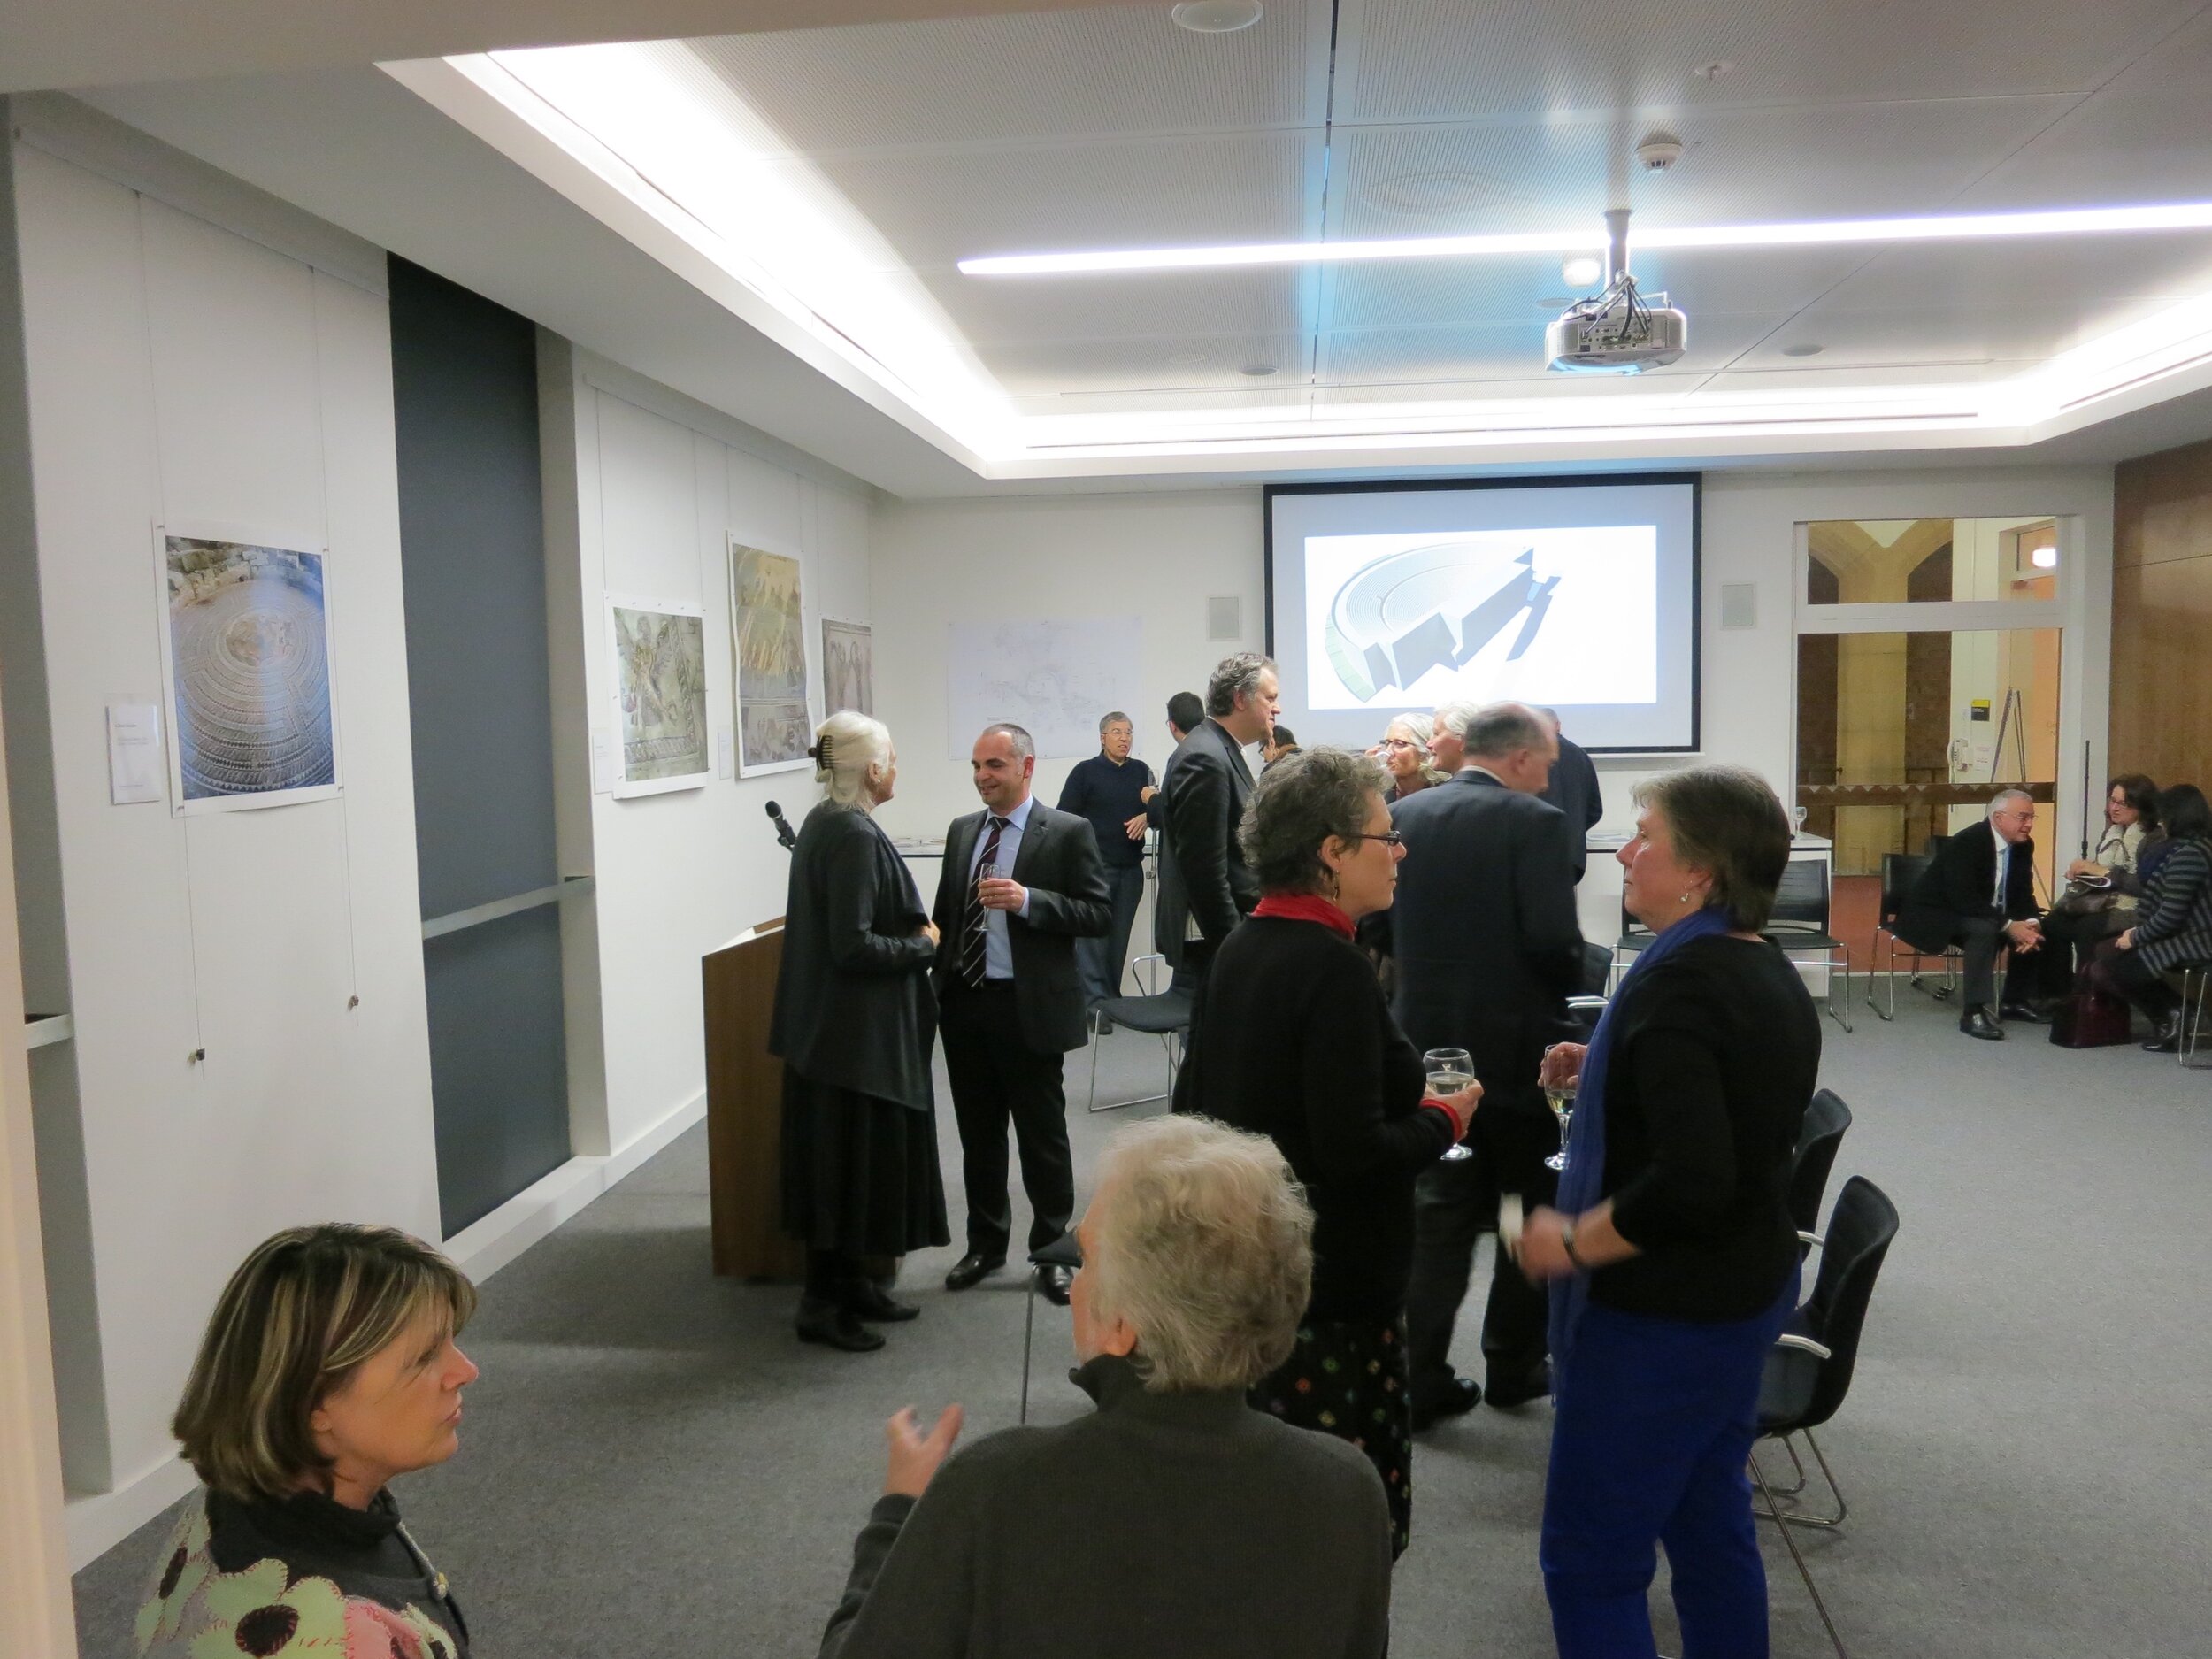  View of the opening of  Response to Cyprus,  10 July 2013, hosted by the Australian Archaeological Institute at Athens (AAIA) at the Centre of Classical and Near Eastern Studies of Australia (CCANESA). Photo: Courtesy of the AAIA. 